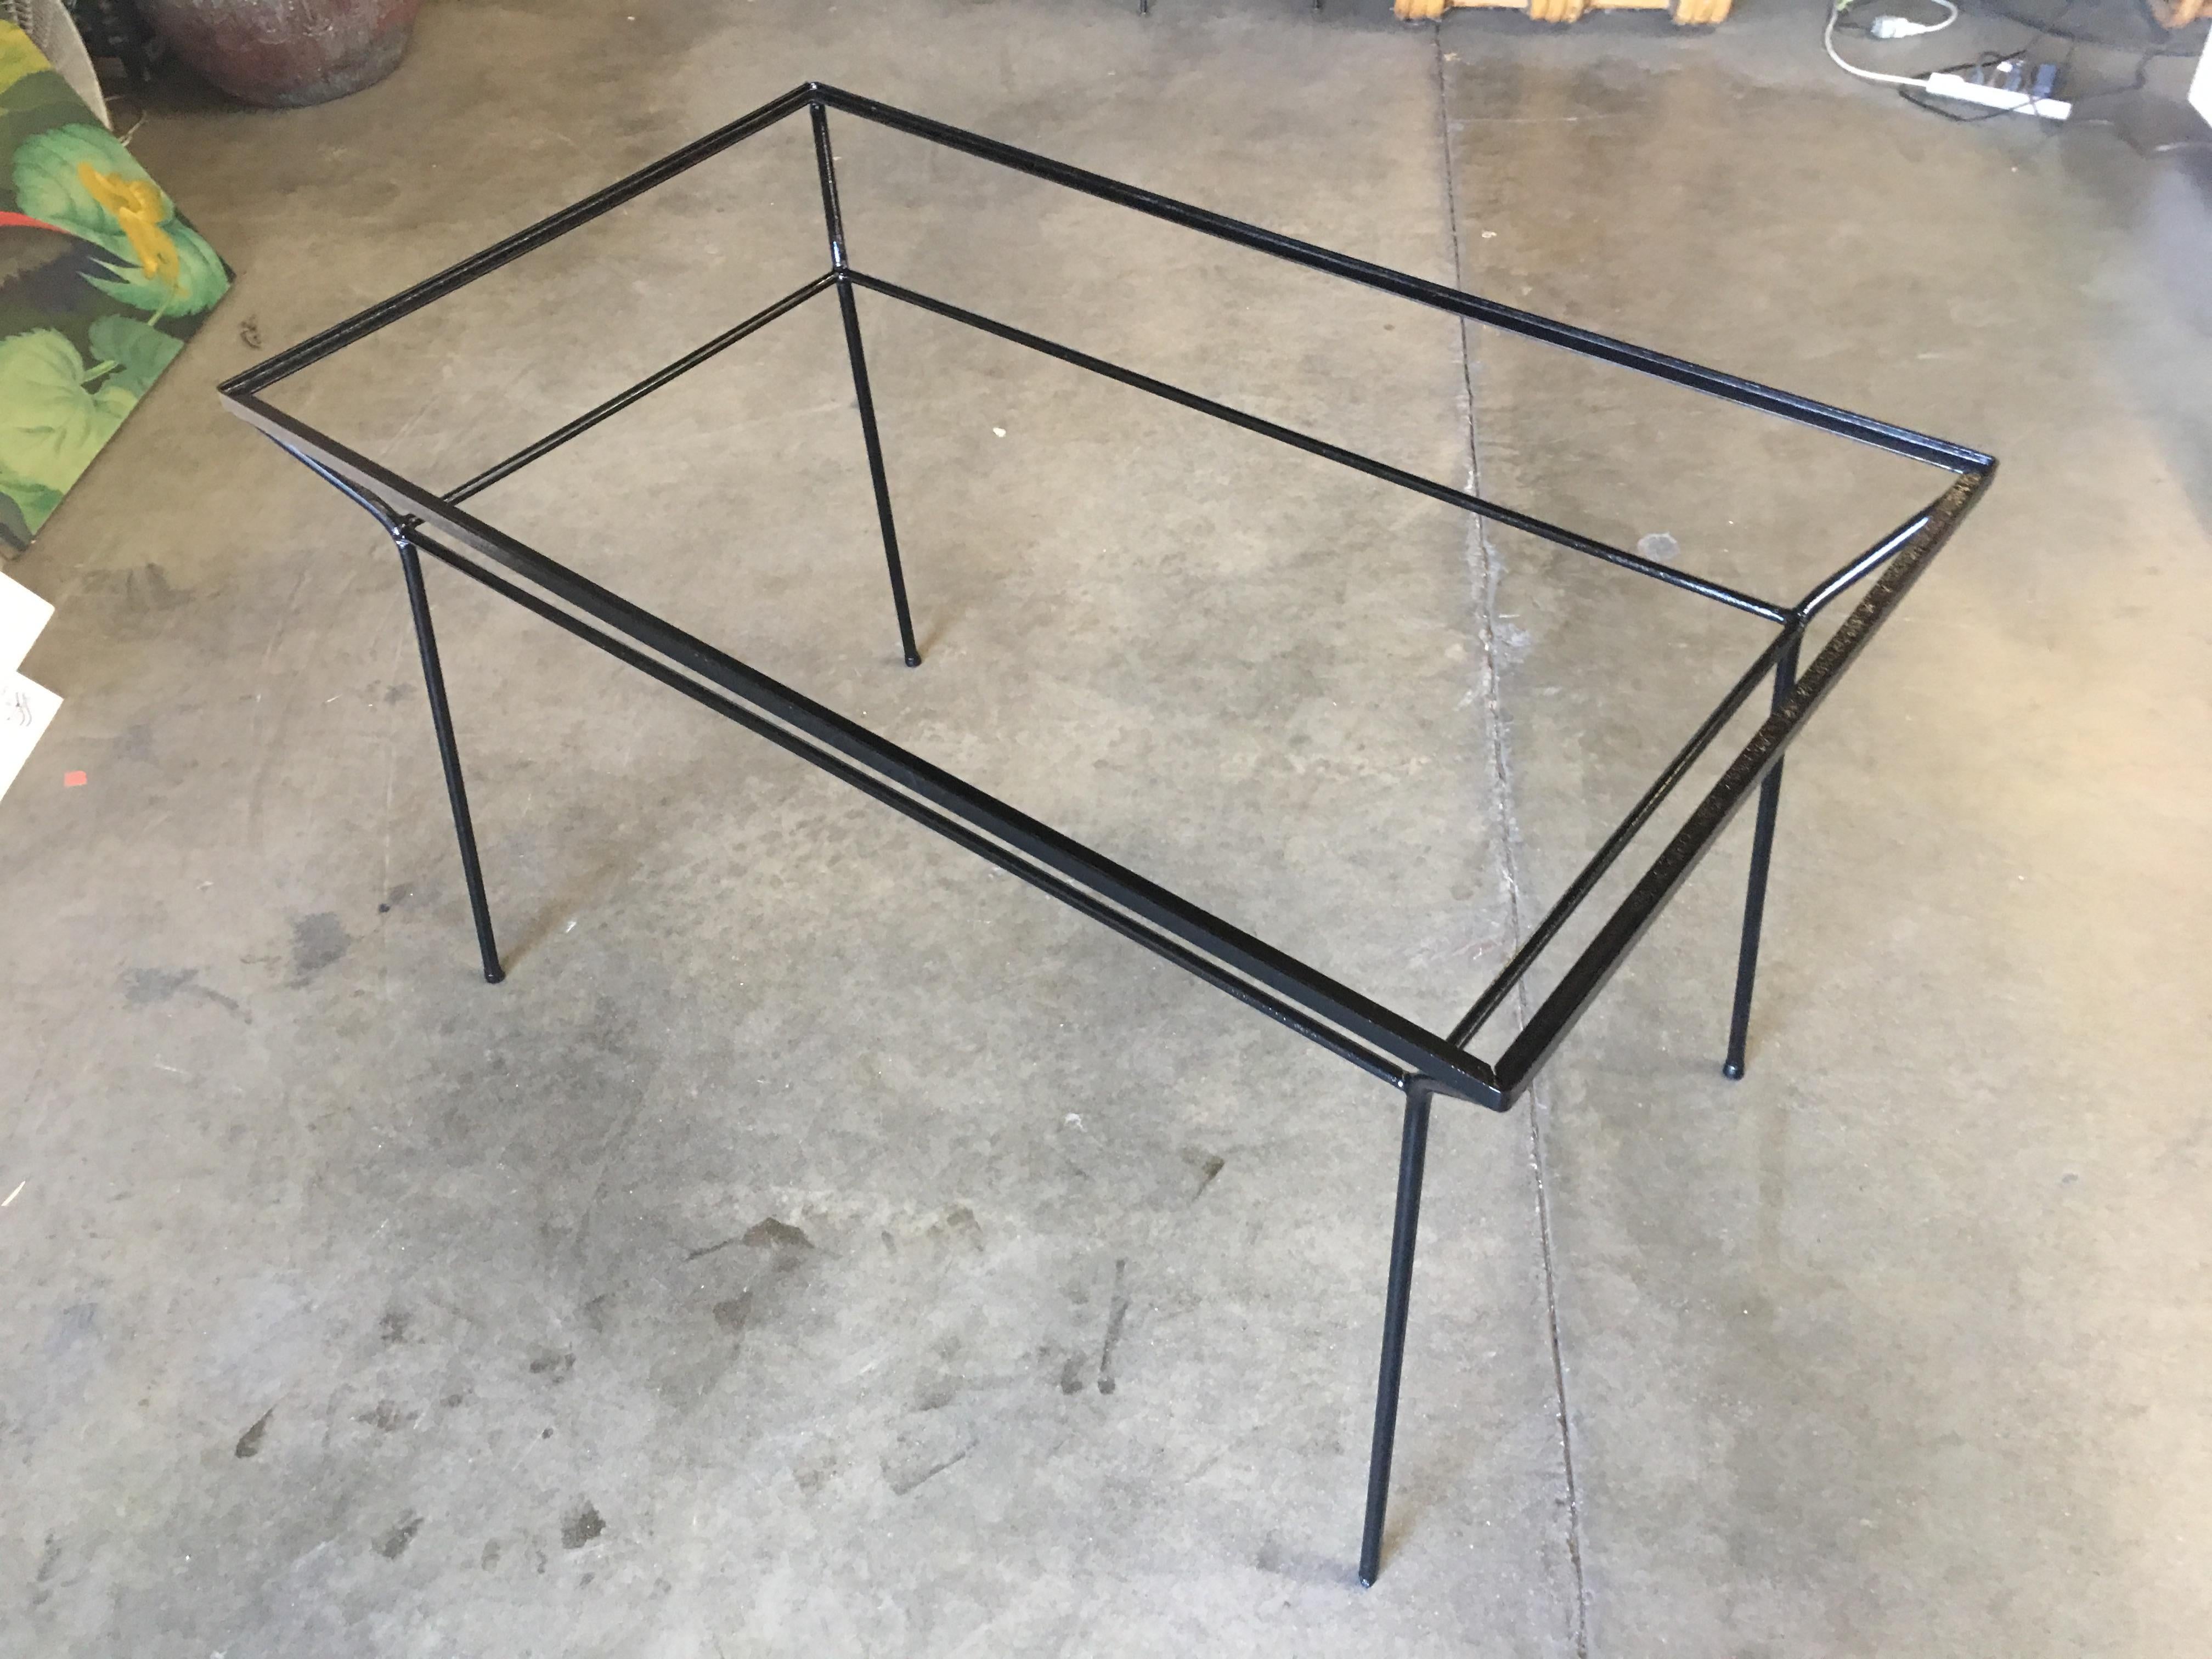 Rare Art Deco iron and glass outdoor dining table featuring a geometric form and petite frame, circa 1940.